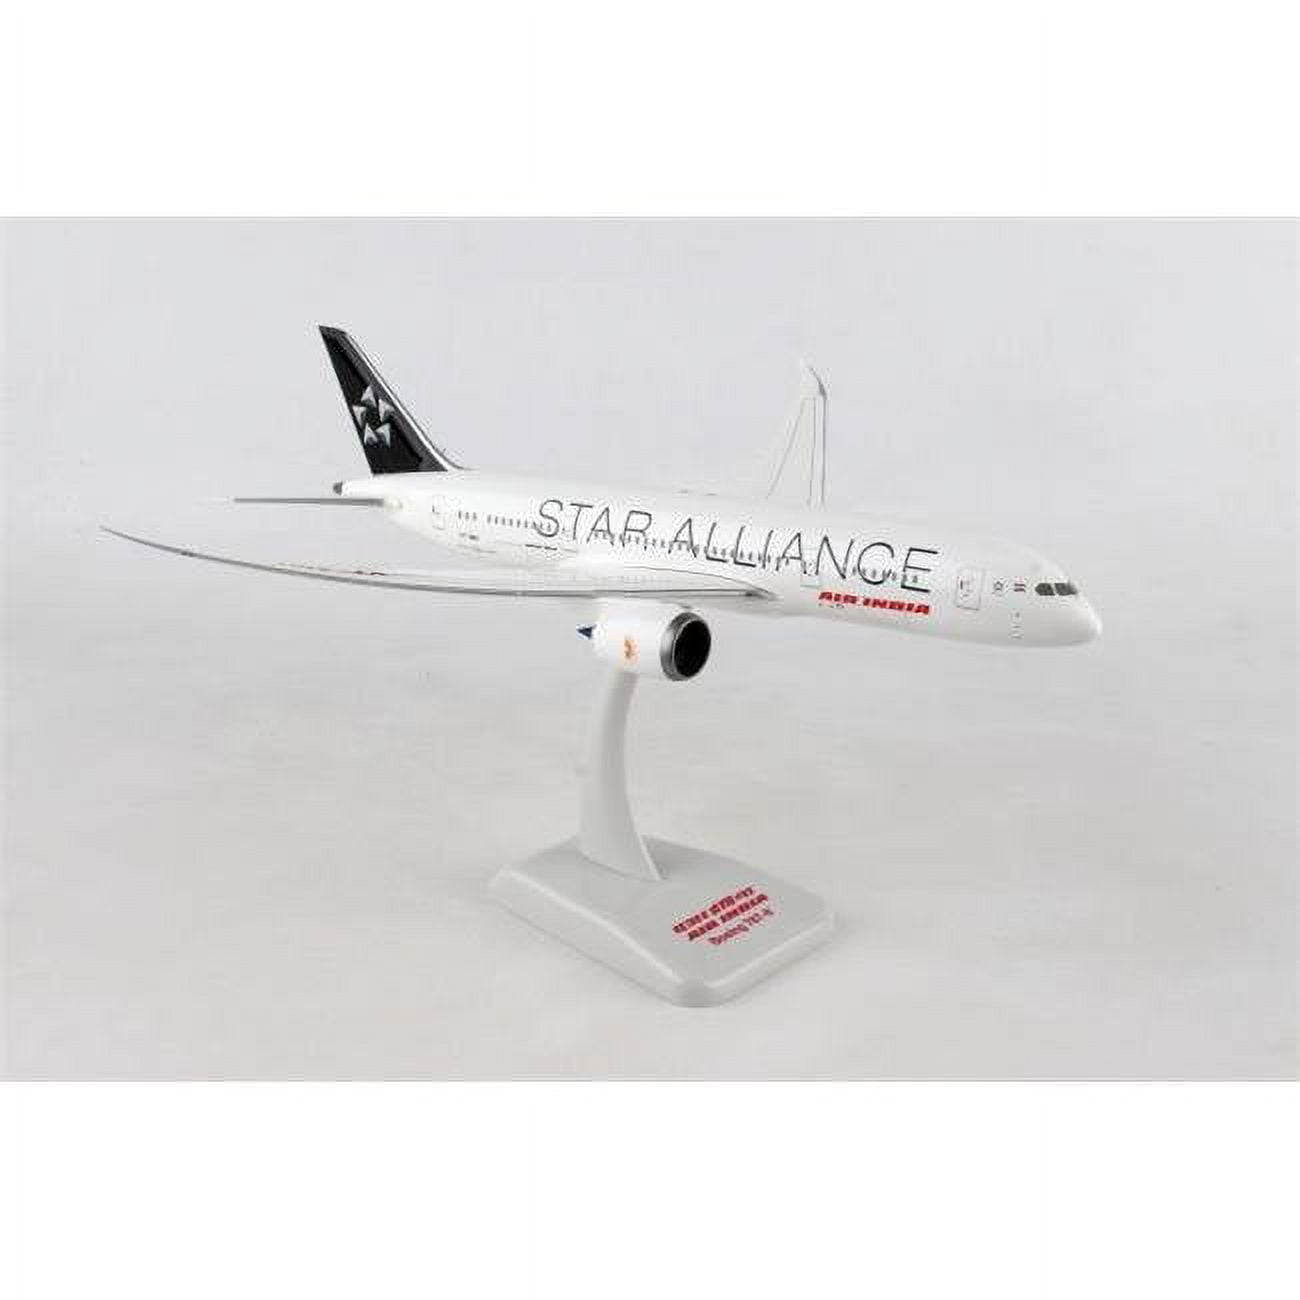 Hogan Wings Hg10277g Air India 787-8 1-200 Star Alliance With Gear & Stand Airplane Model